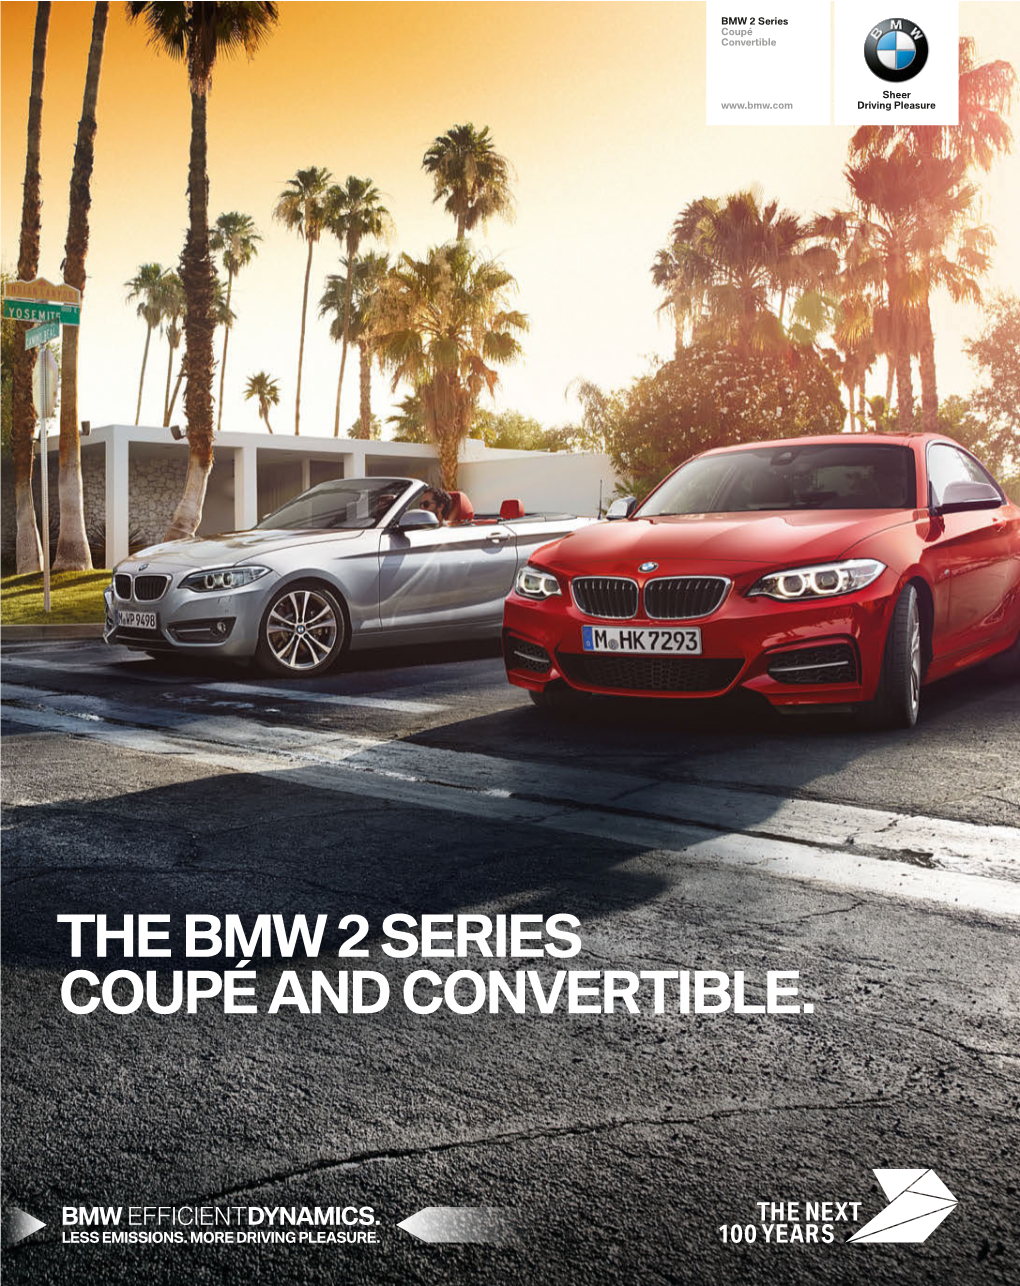 The Bmw 2 Series Coupé and Convertible